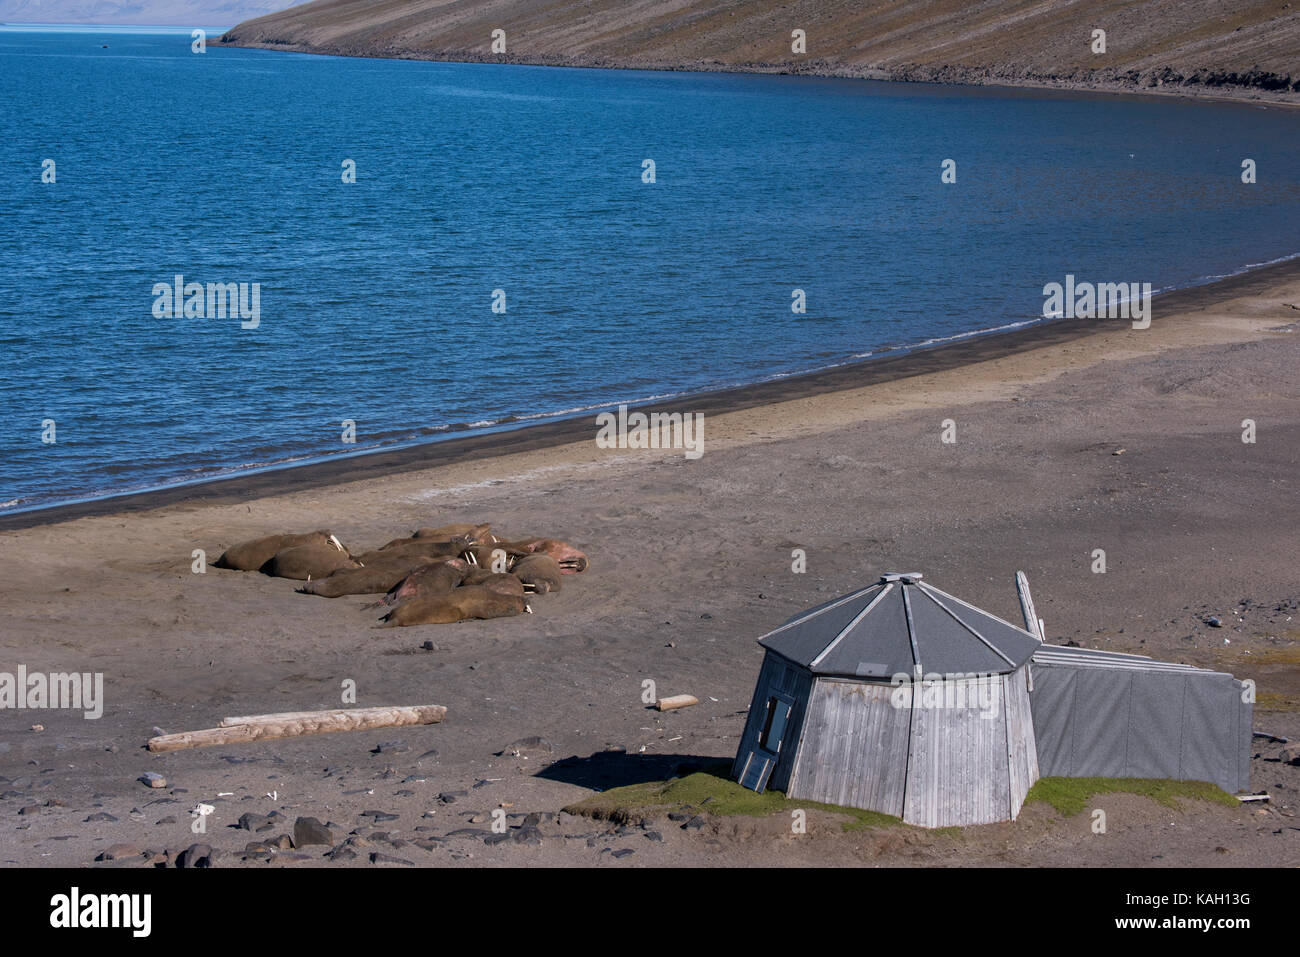 Norway, Svalbard, South Svalbard Nature Reserve, Edgeoya, Kapp Lee. Small group of walrus hauled out on remote beach (WILD: Odobenus roamerus) with ty Stock Photo